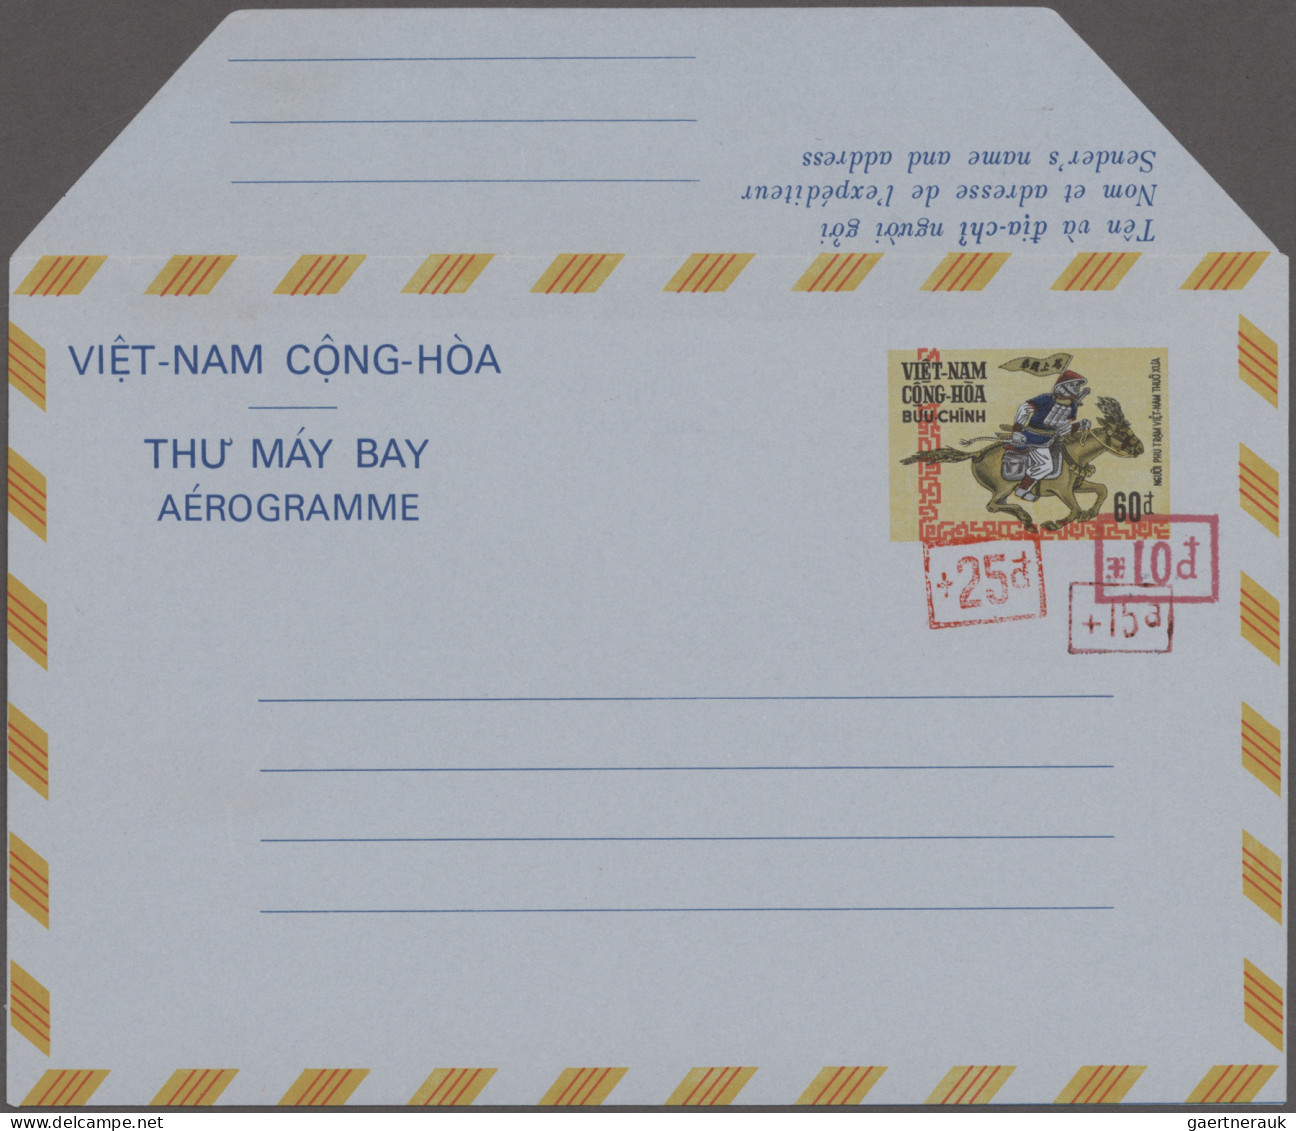 South-Vietnam (1951-1975): 1962/1996, collection of 26 air letter sheets unused/